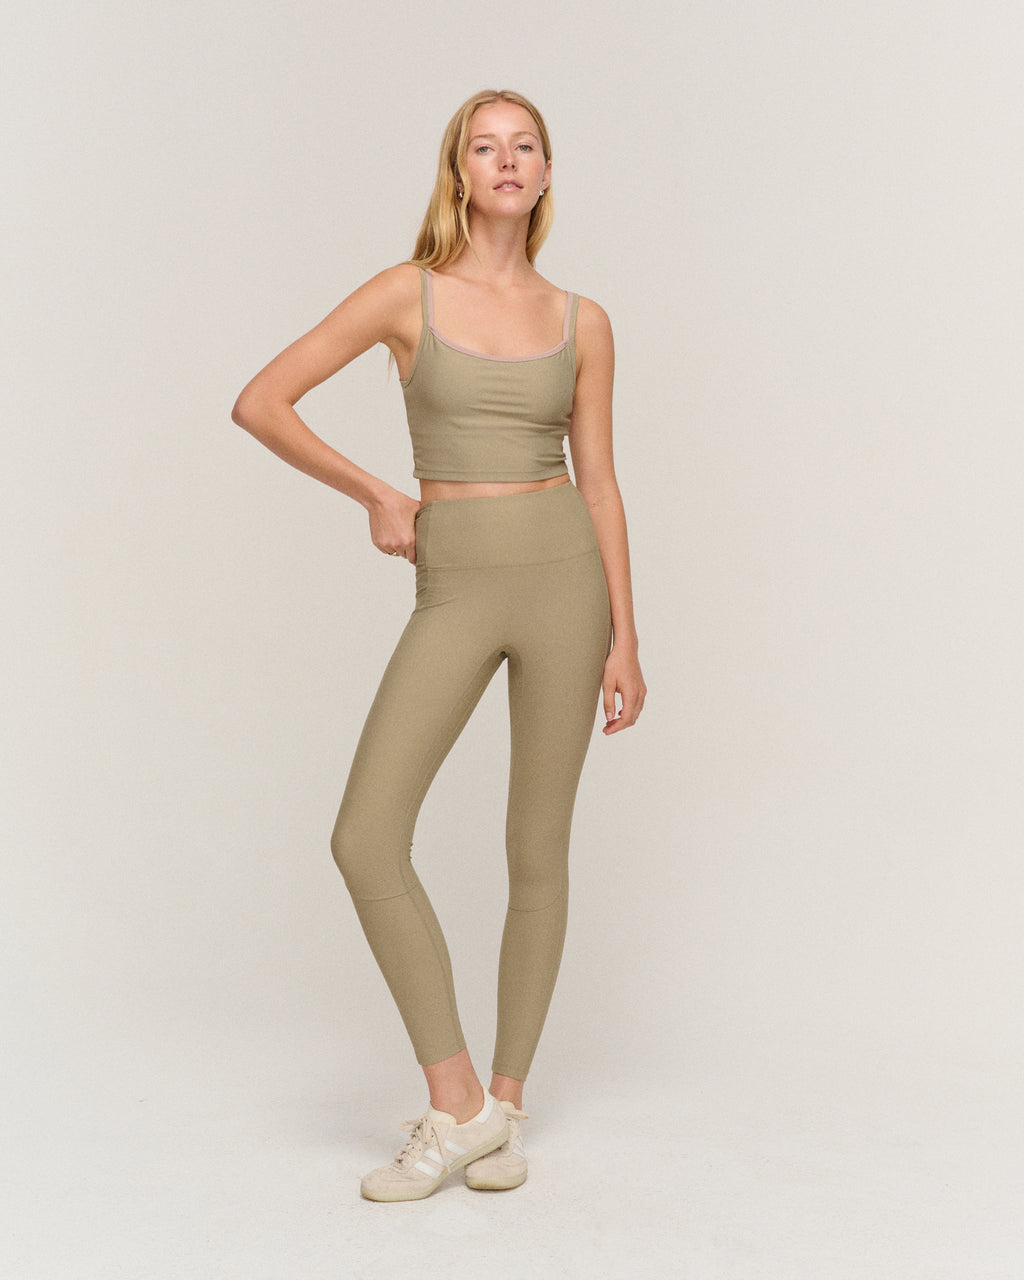 Nylora Levee Legging in Yellow - ShopStyle